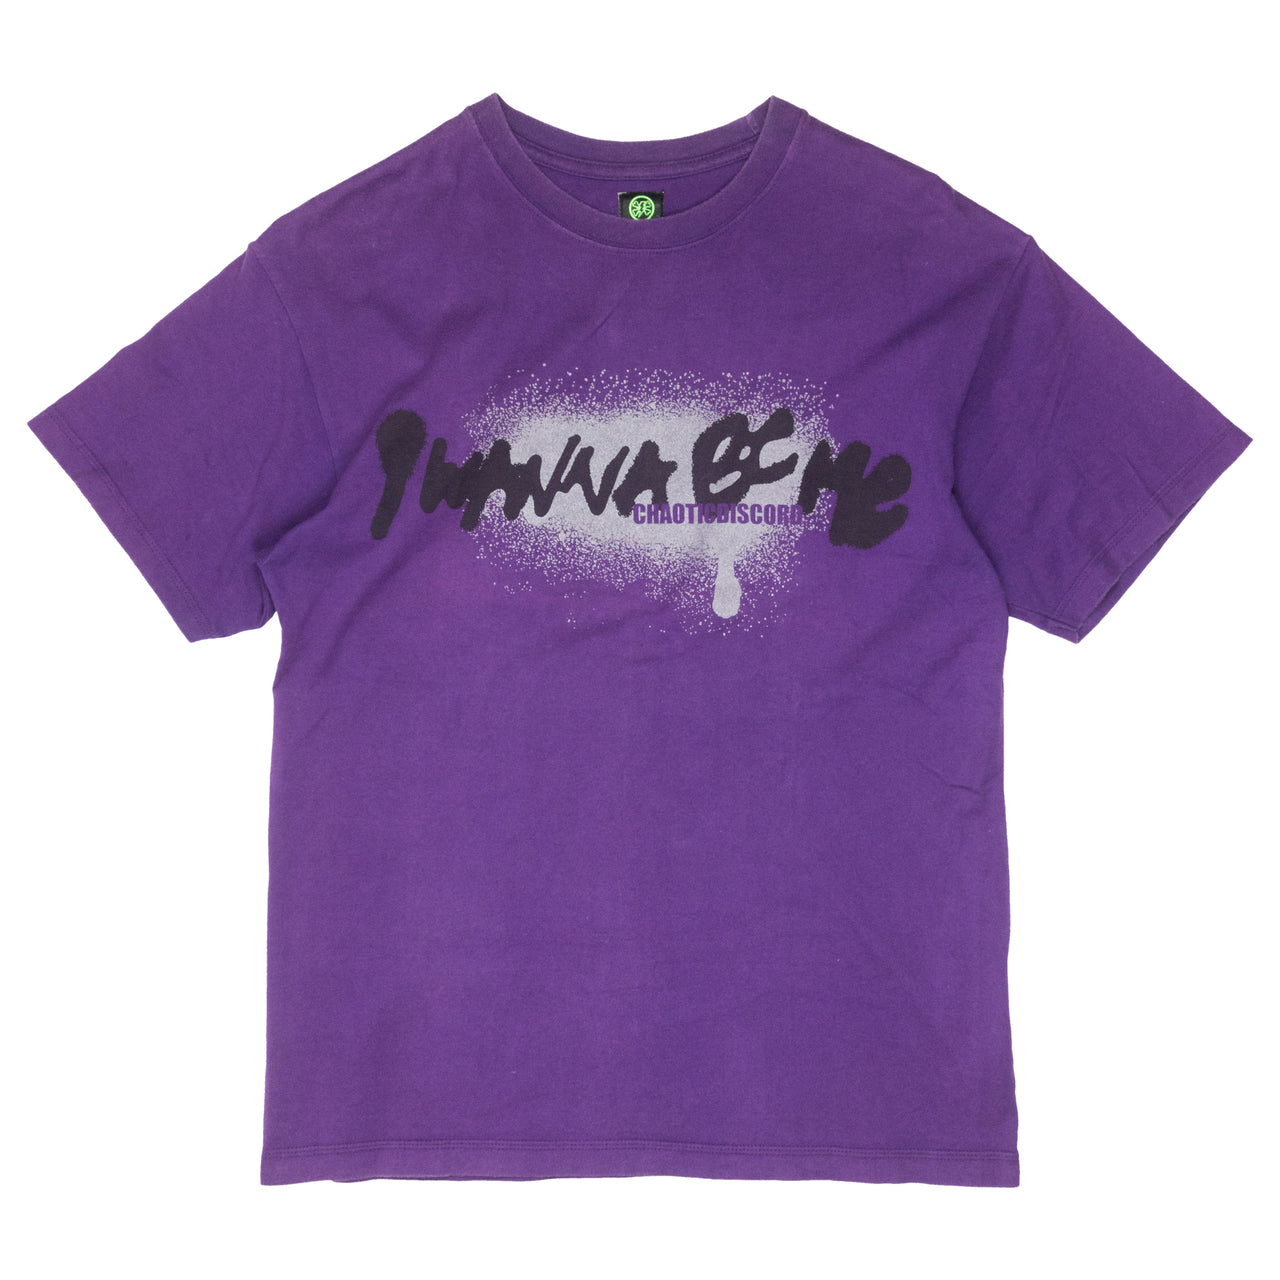 Undercover "I Wanna Be Me" Tee - SS01 "Chaotic Discord"